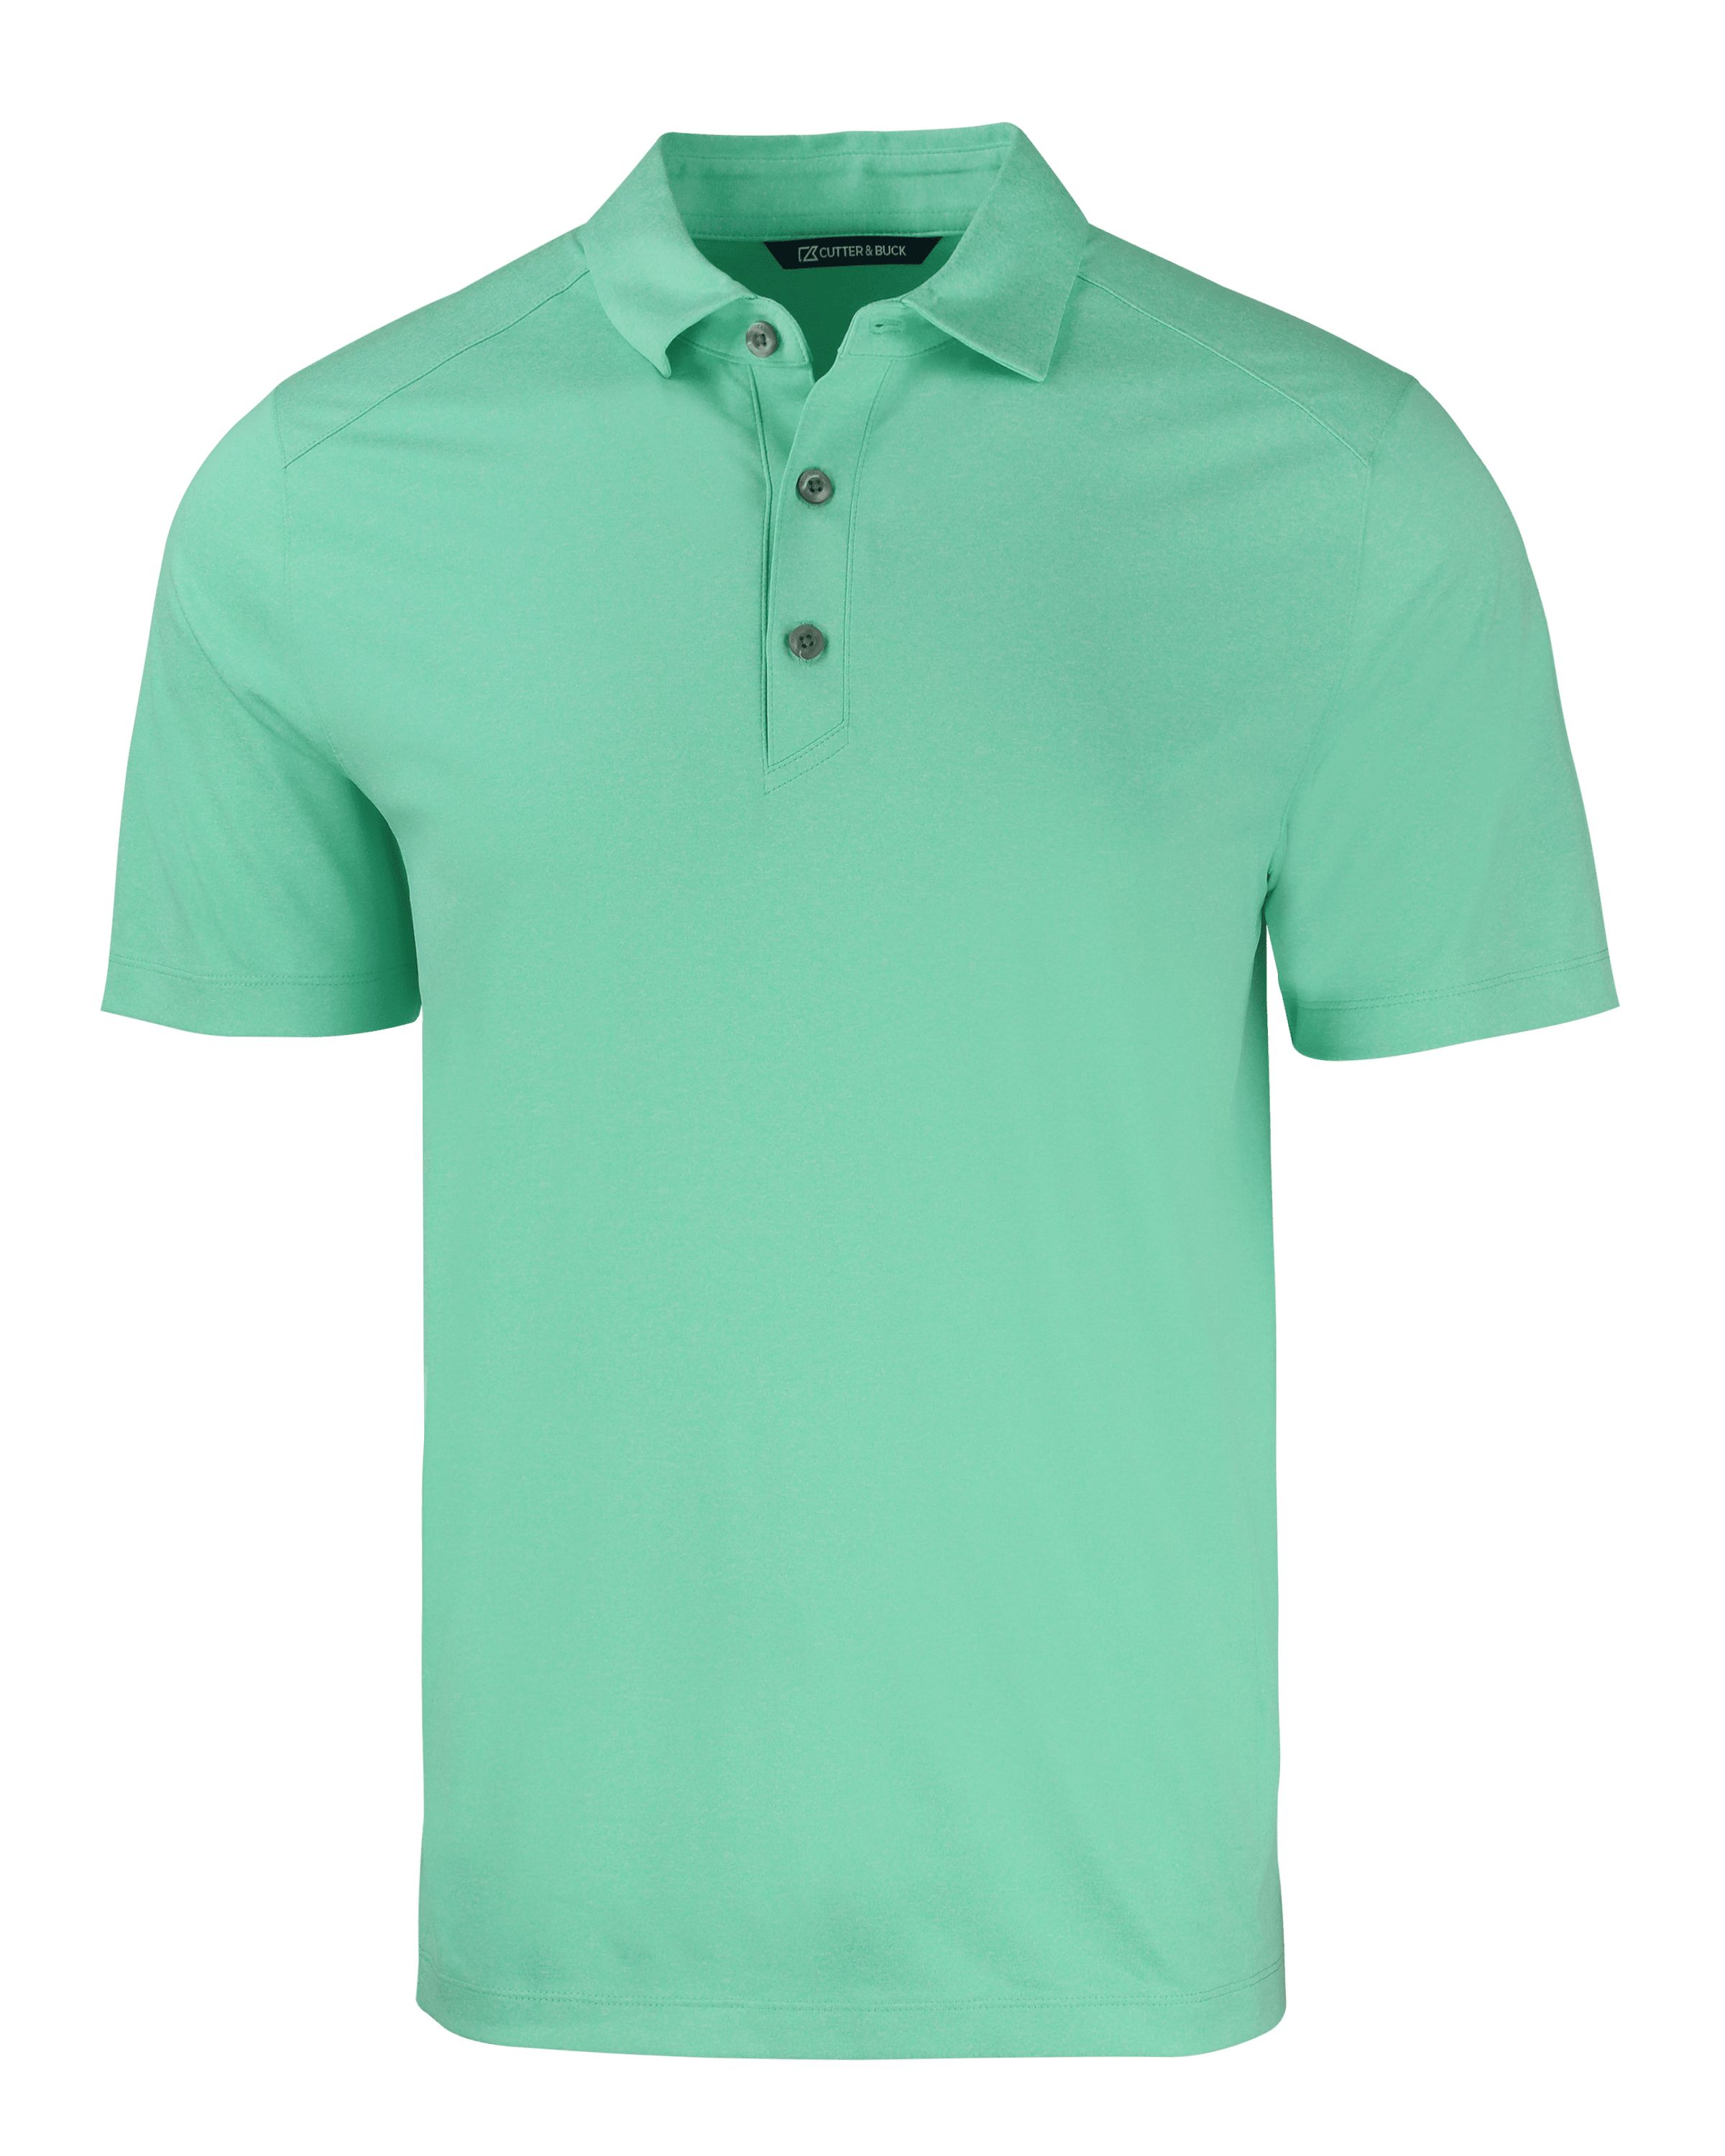 click to view Fresh Mint Heather(FMH)